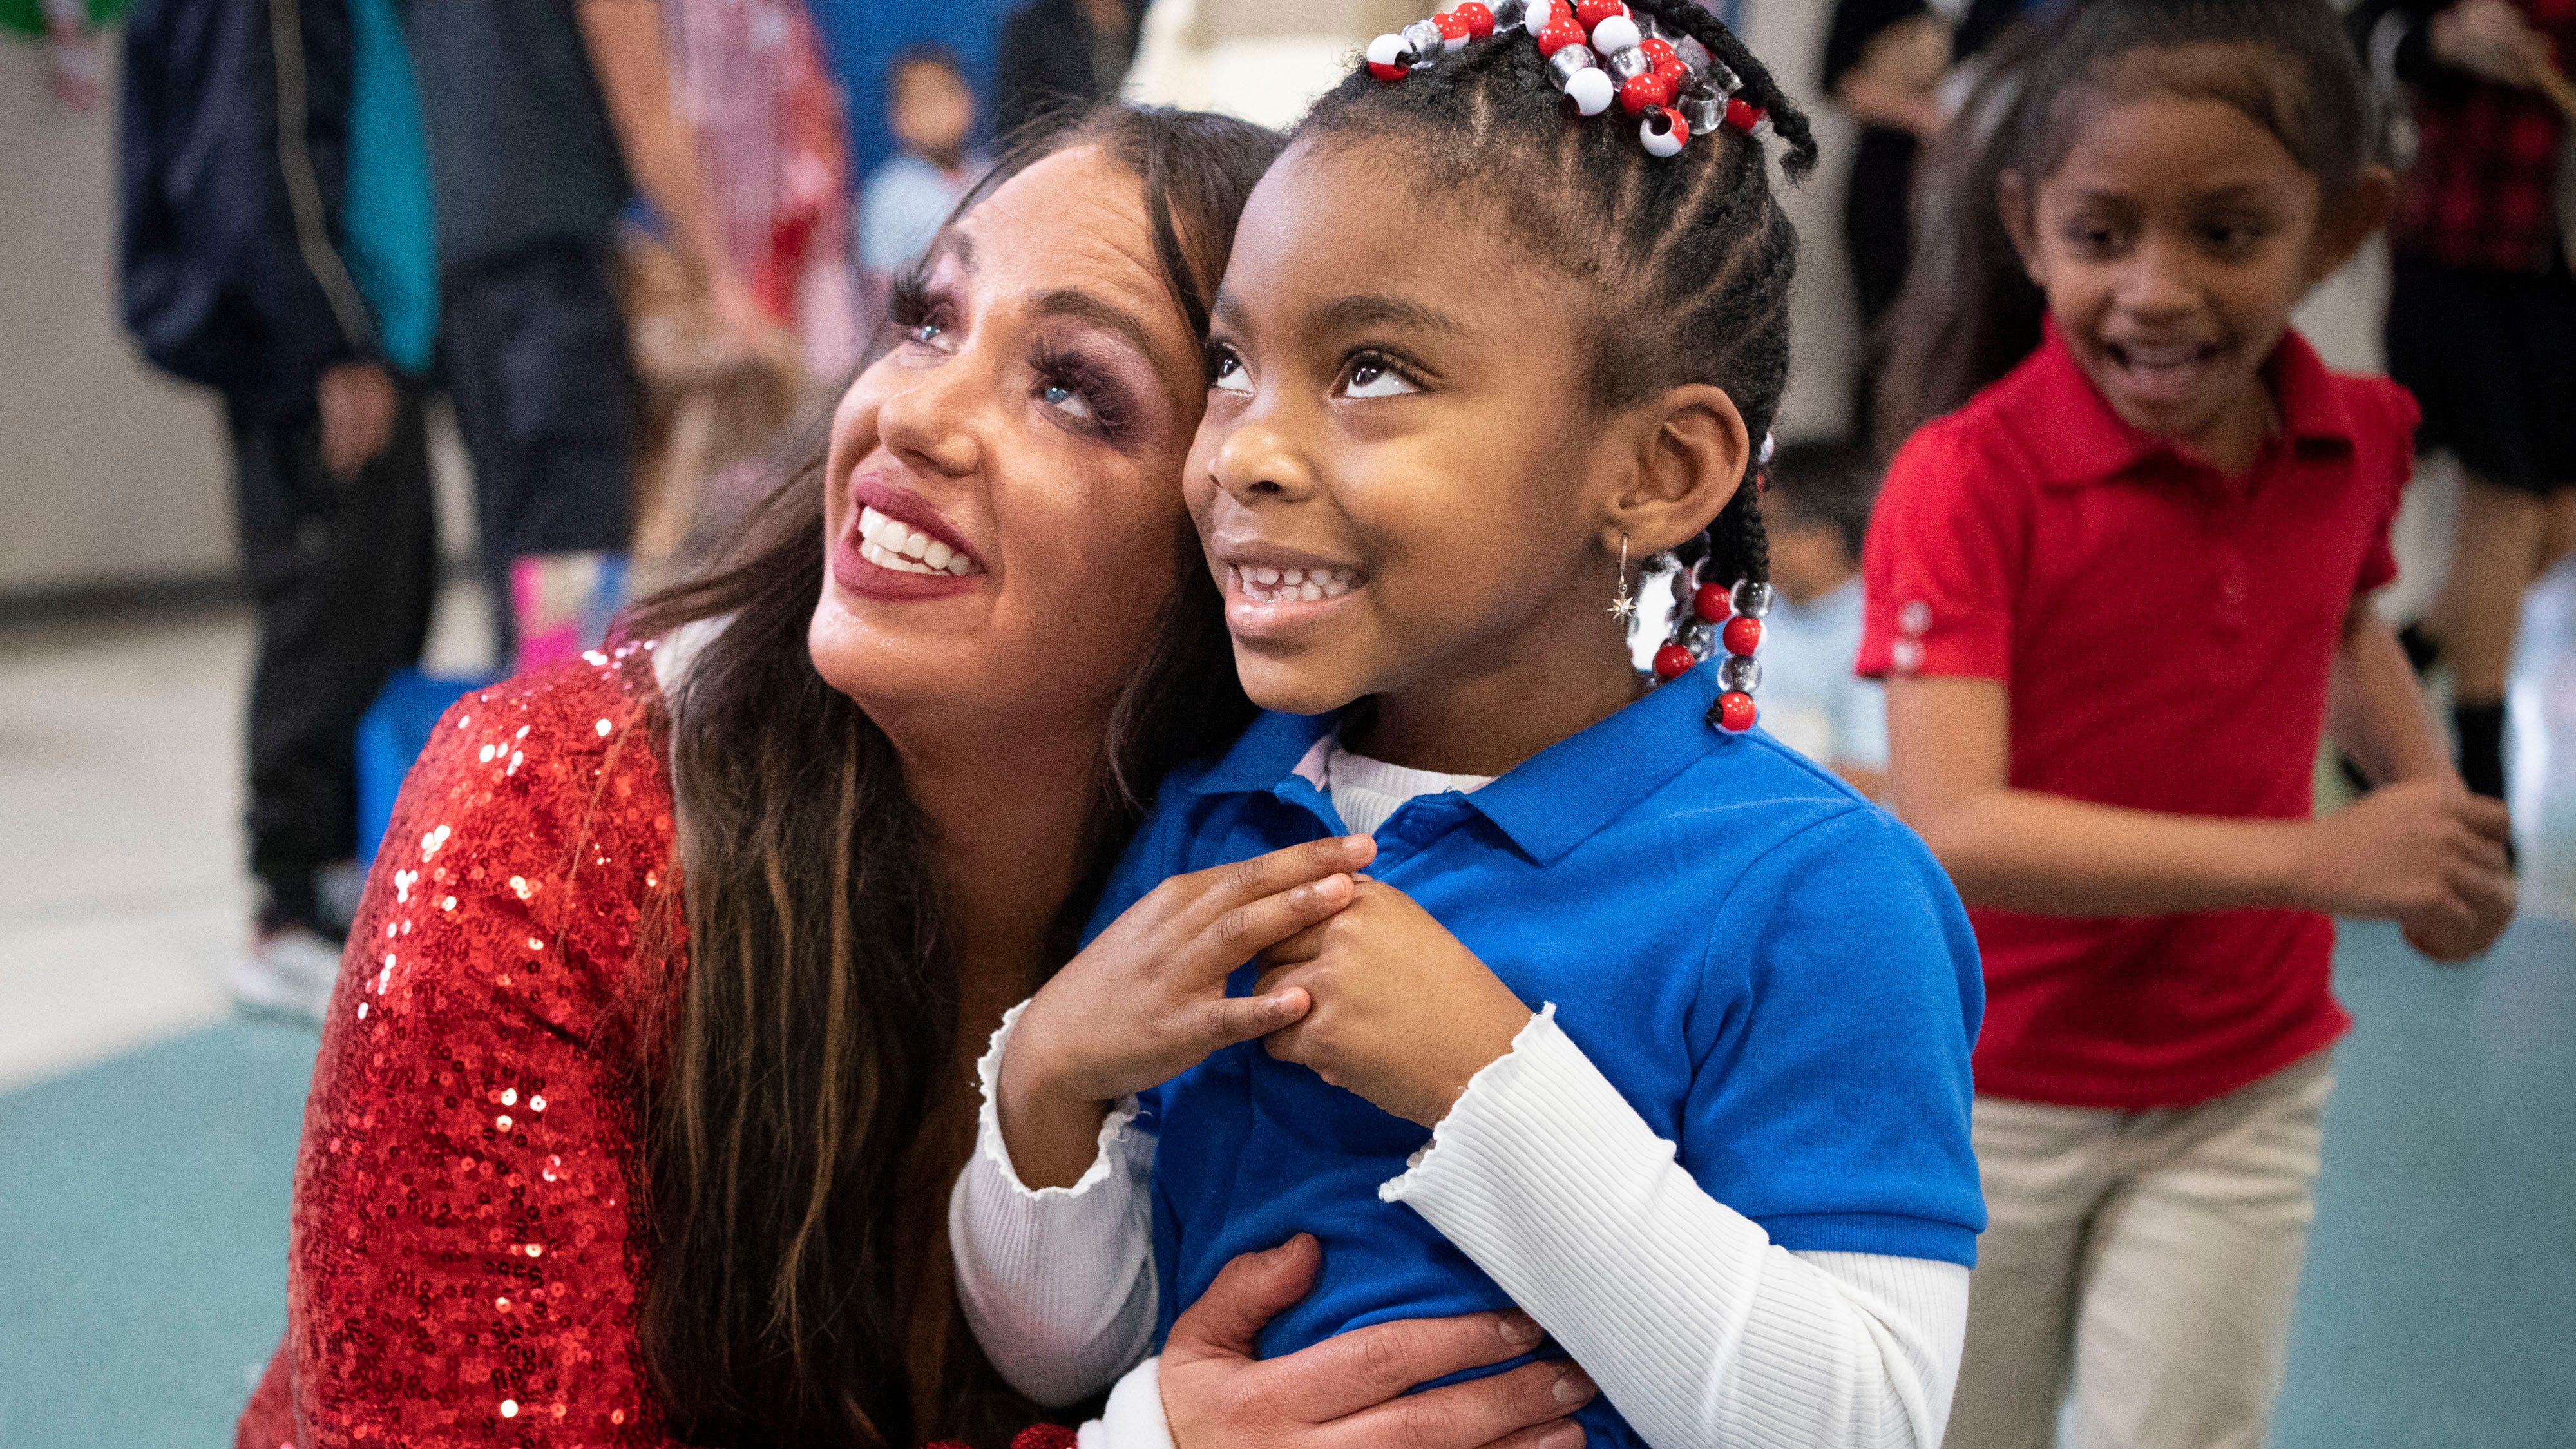 Tusculum Elementary School first grade teacher Laura Timbario-Quering hugs first grader Katrina Holman during a holiday celebration Wednesday, Dec. 14, 2022 in Nashville, Tenn. Timbario-Quering organized a Secret Santa giveaway for 150 elementary school students.